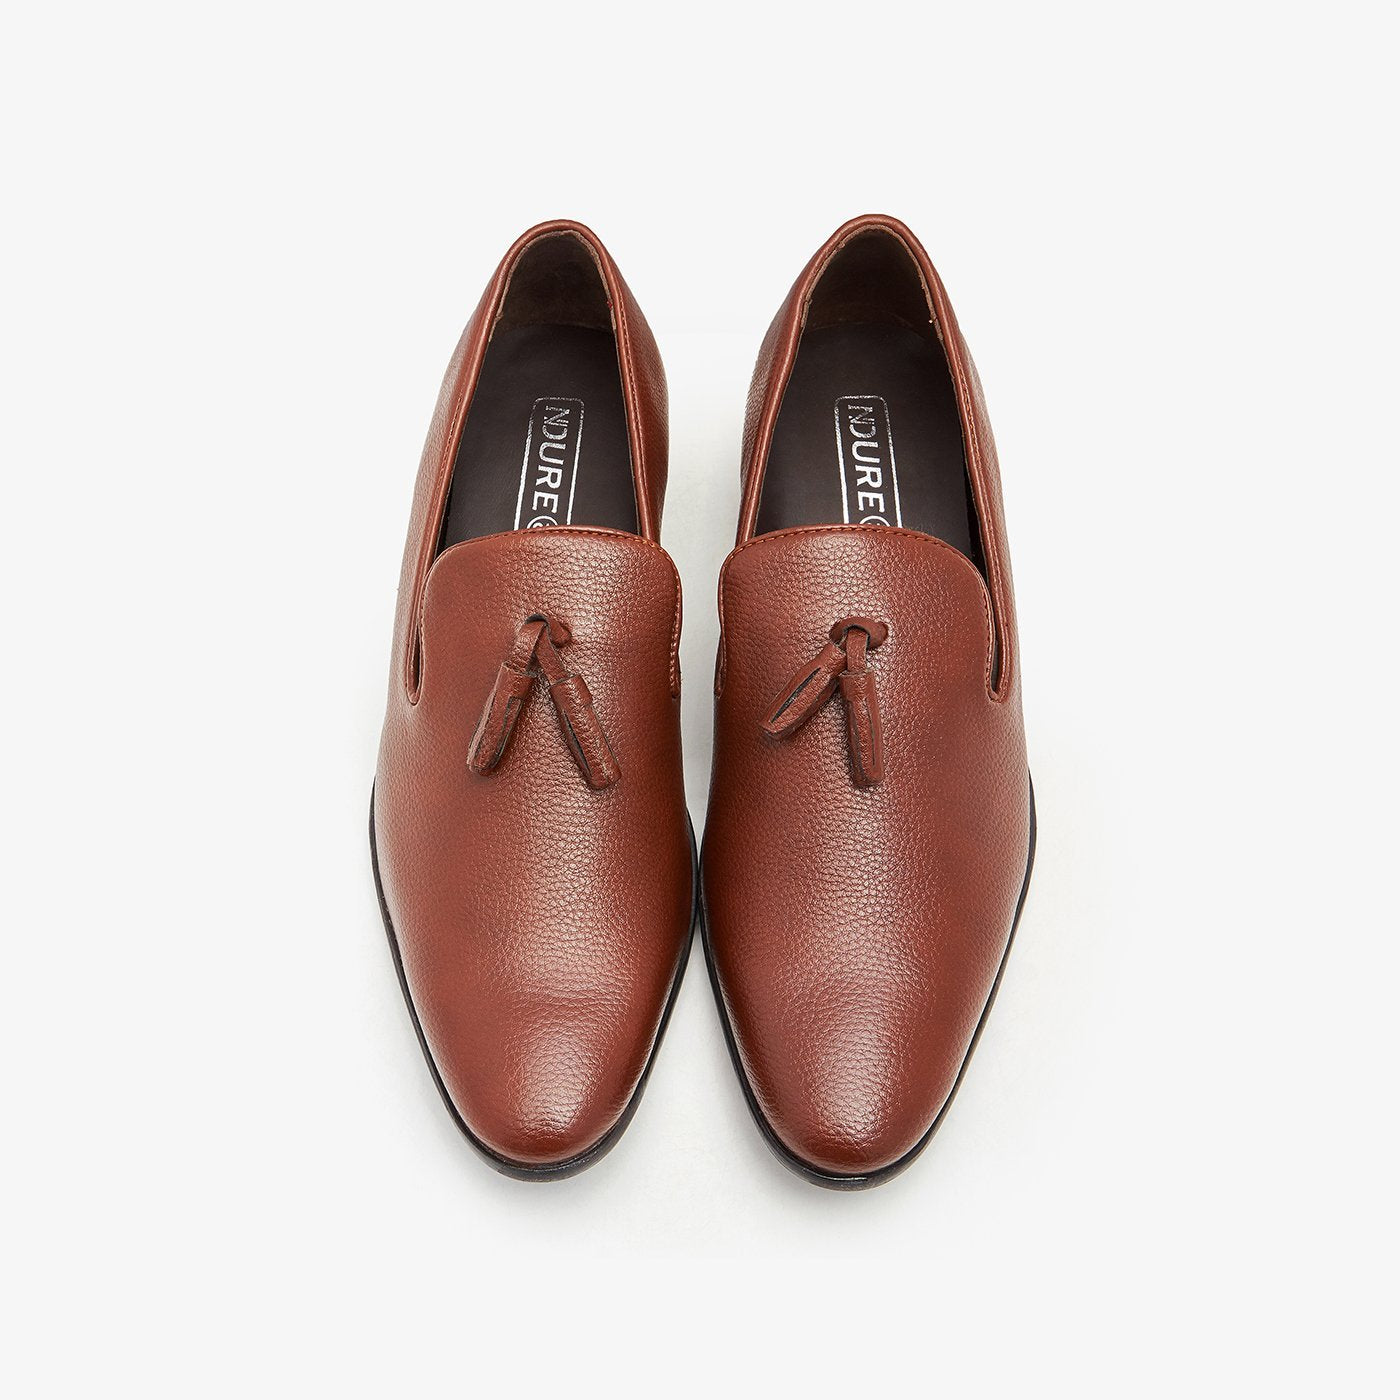 Brown formal shoes in Pakistan